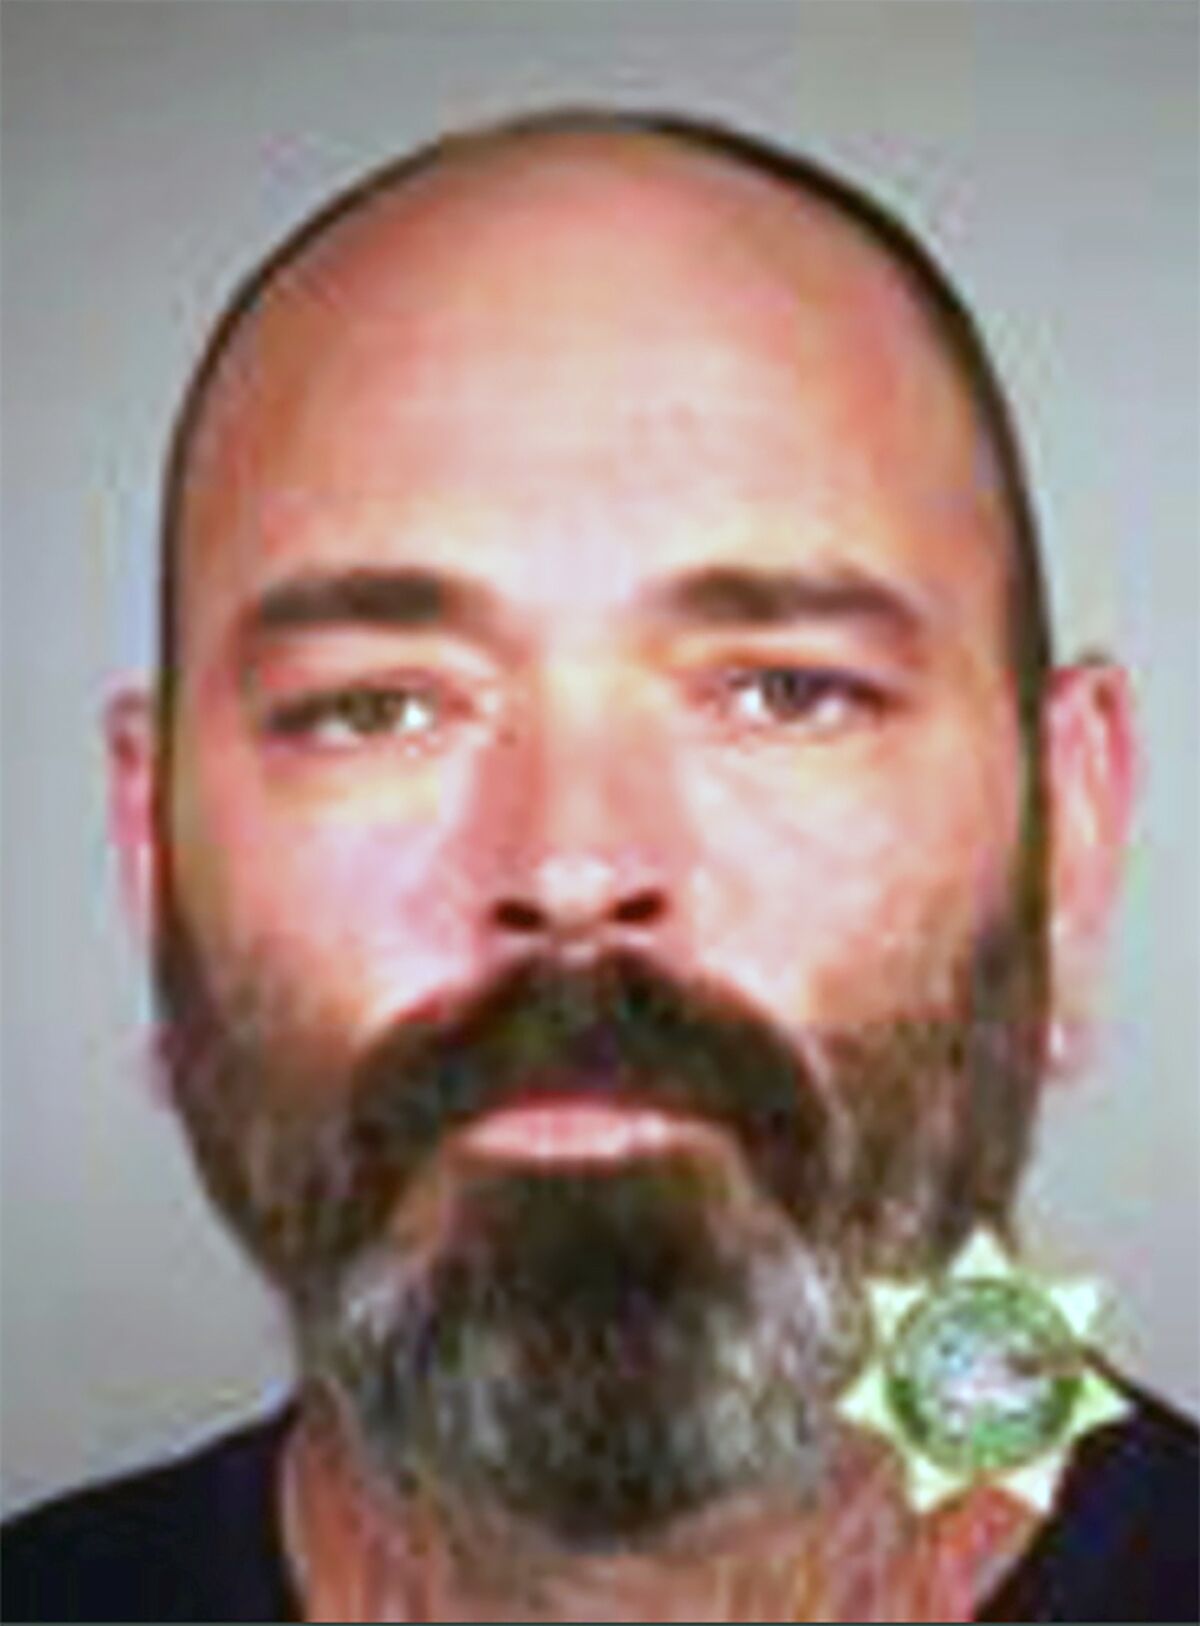 FILE - This undated booking file photo provided by the Multnomah County Sheriff's Office shows Alan James Swinney, a member of the Proud Boys right-wing group. Swinney has been sentenced to 10 years in prison for his violent actions during August 2020 protests in Portland, Oregon. (Multnomah County Sheriff's Office via AP, File)